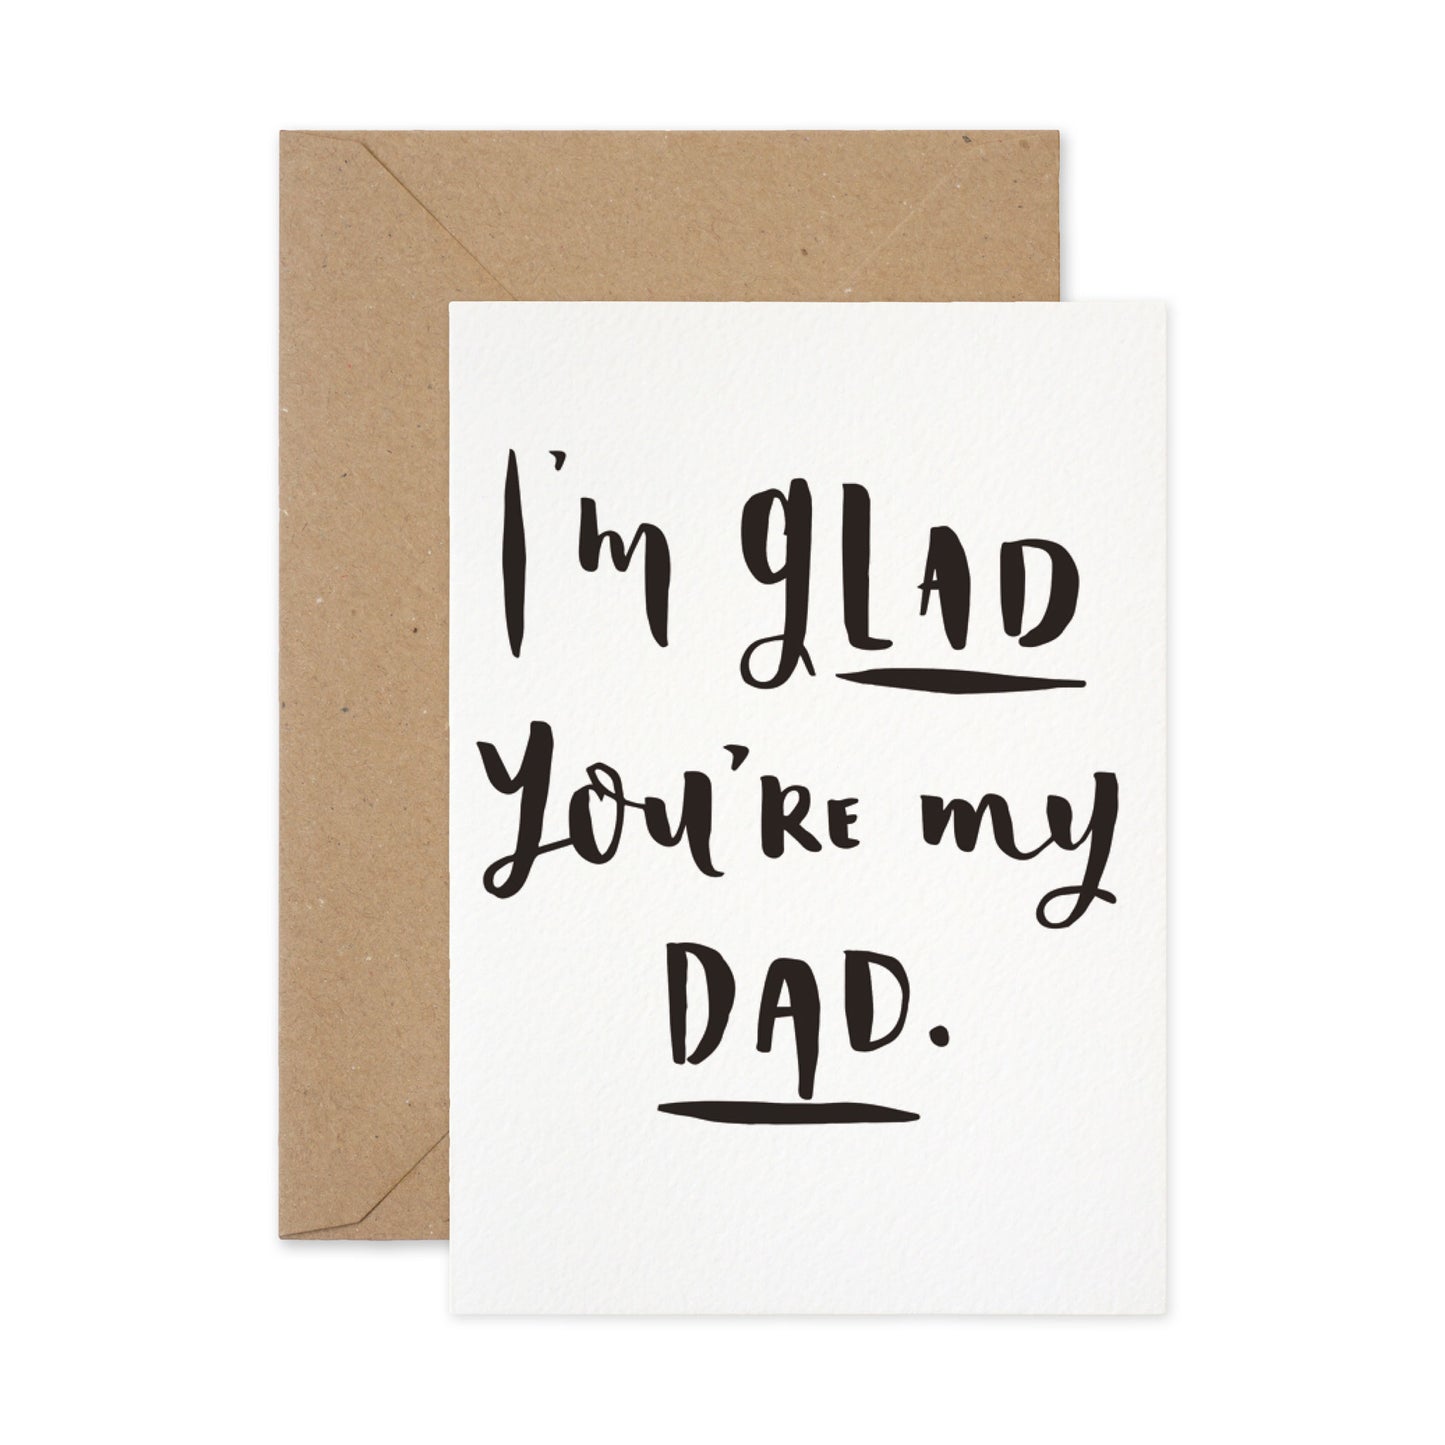 Glad you're my Dad Card